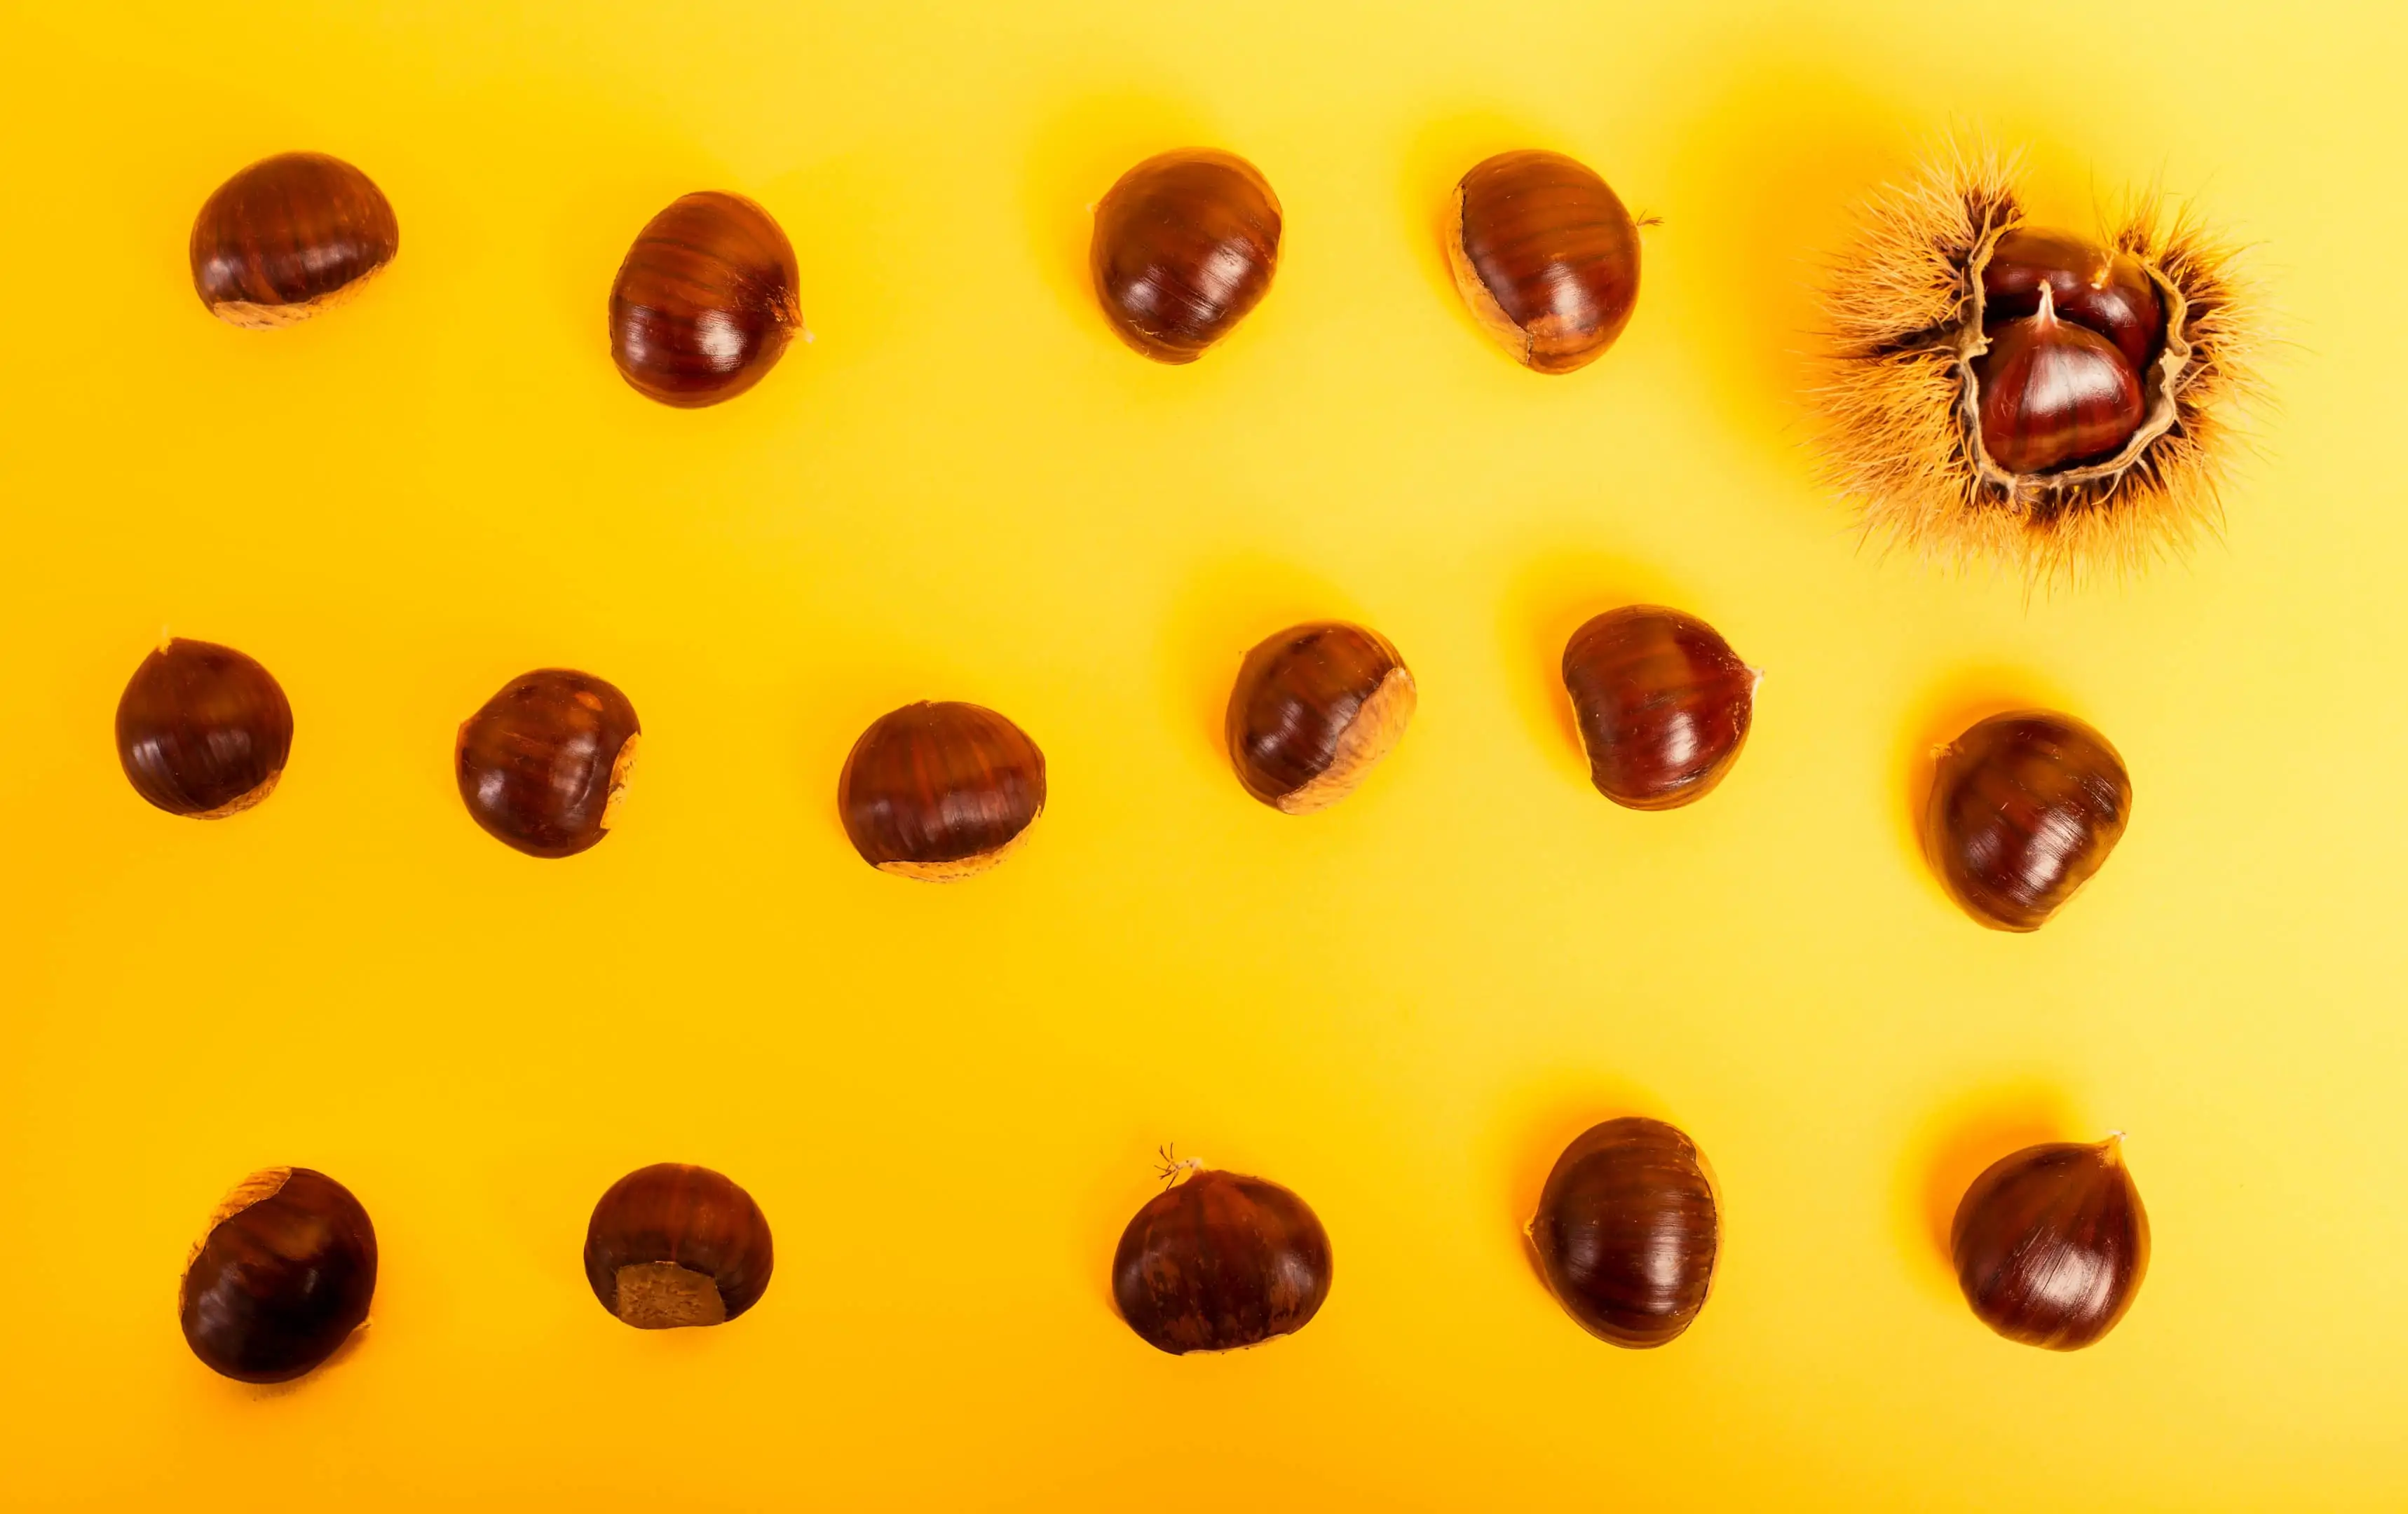 Chestnuts assortment on yellow background